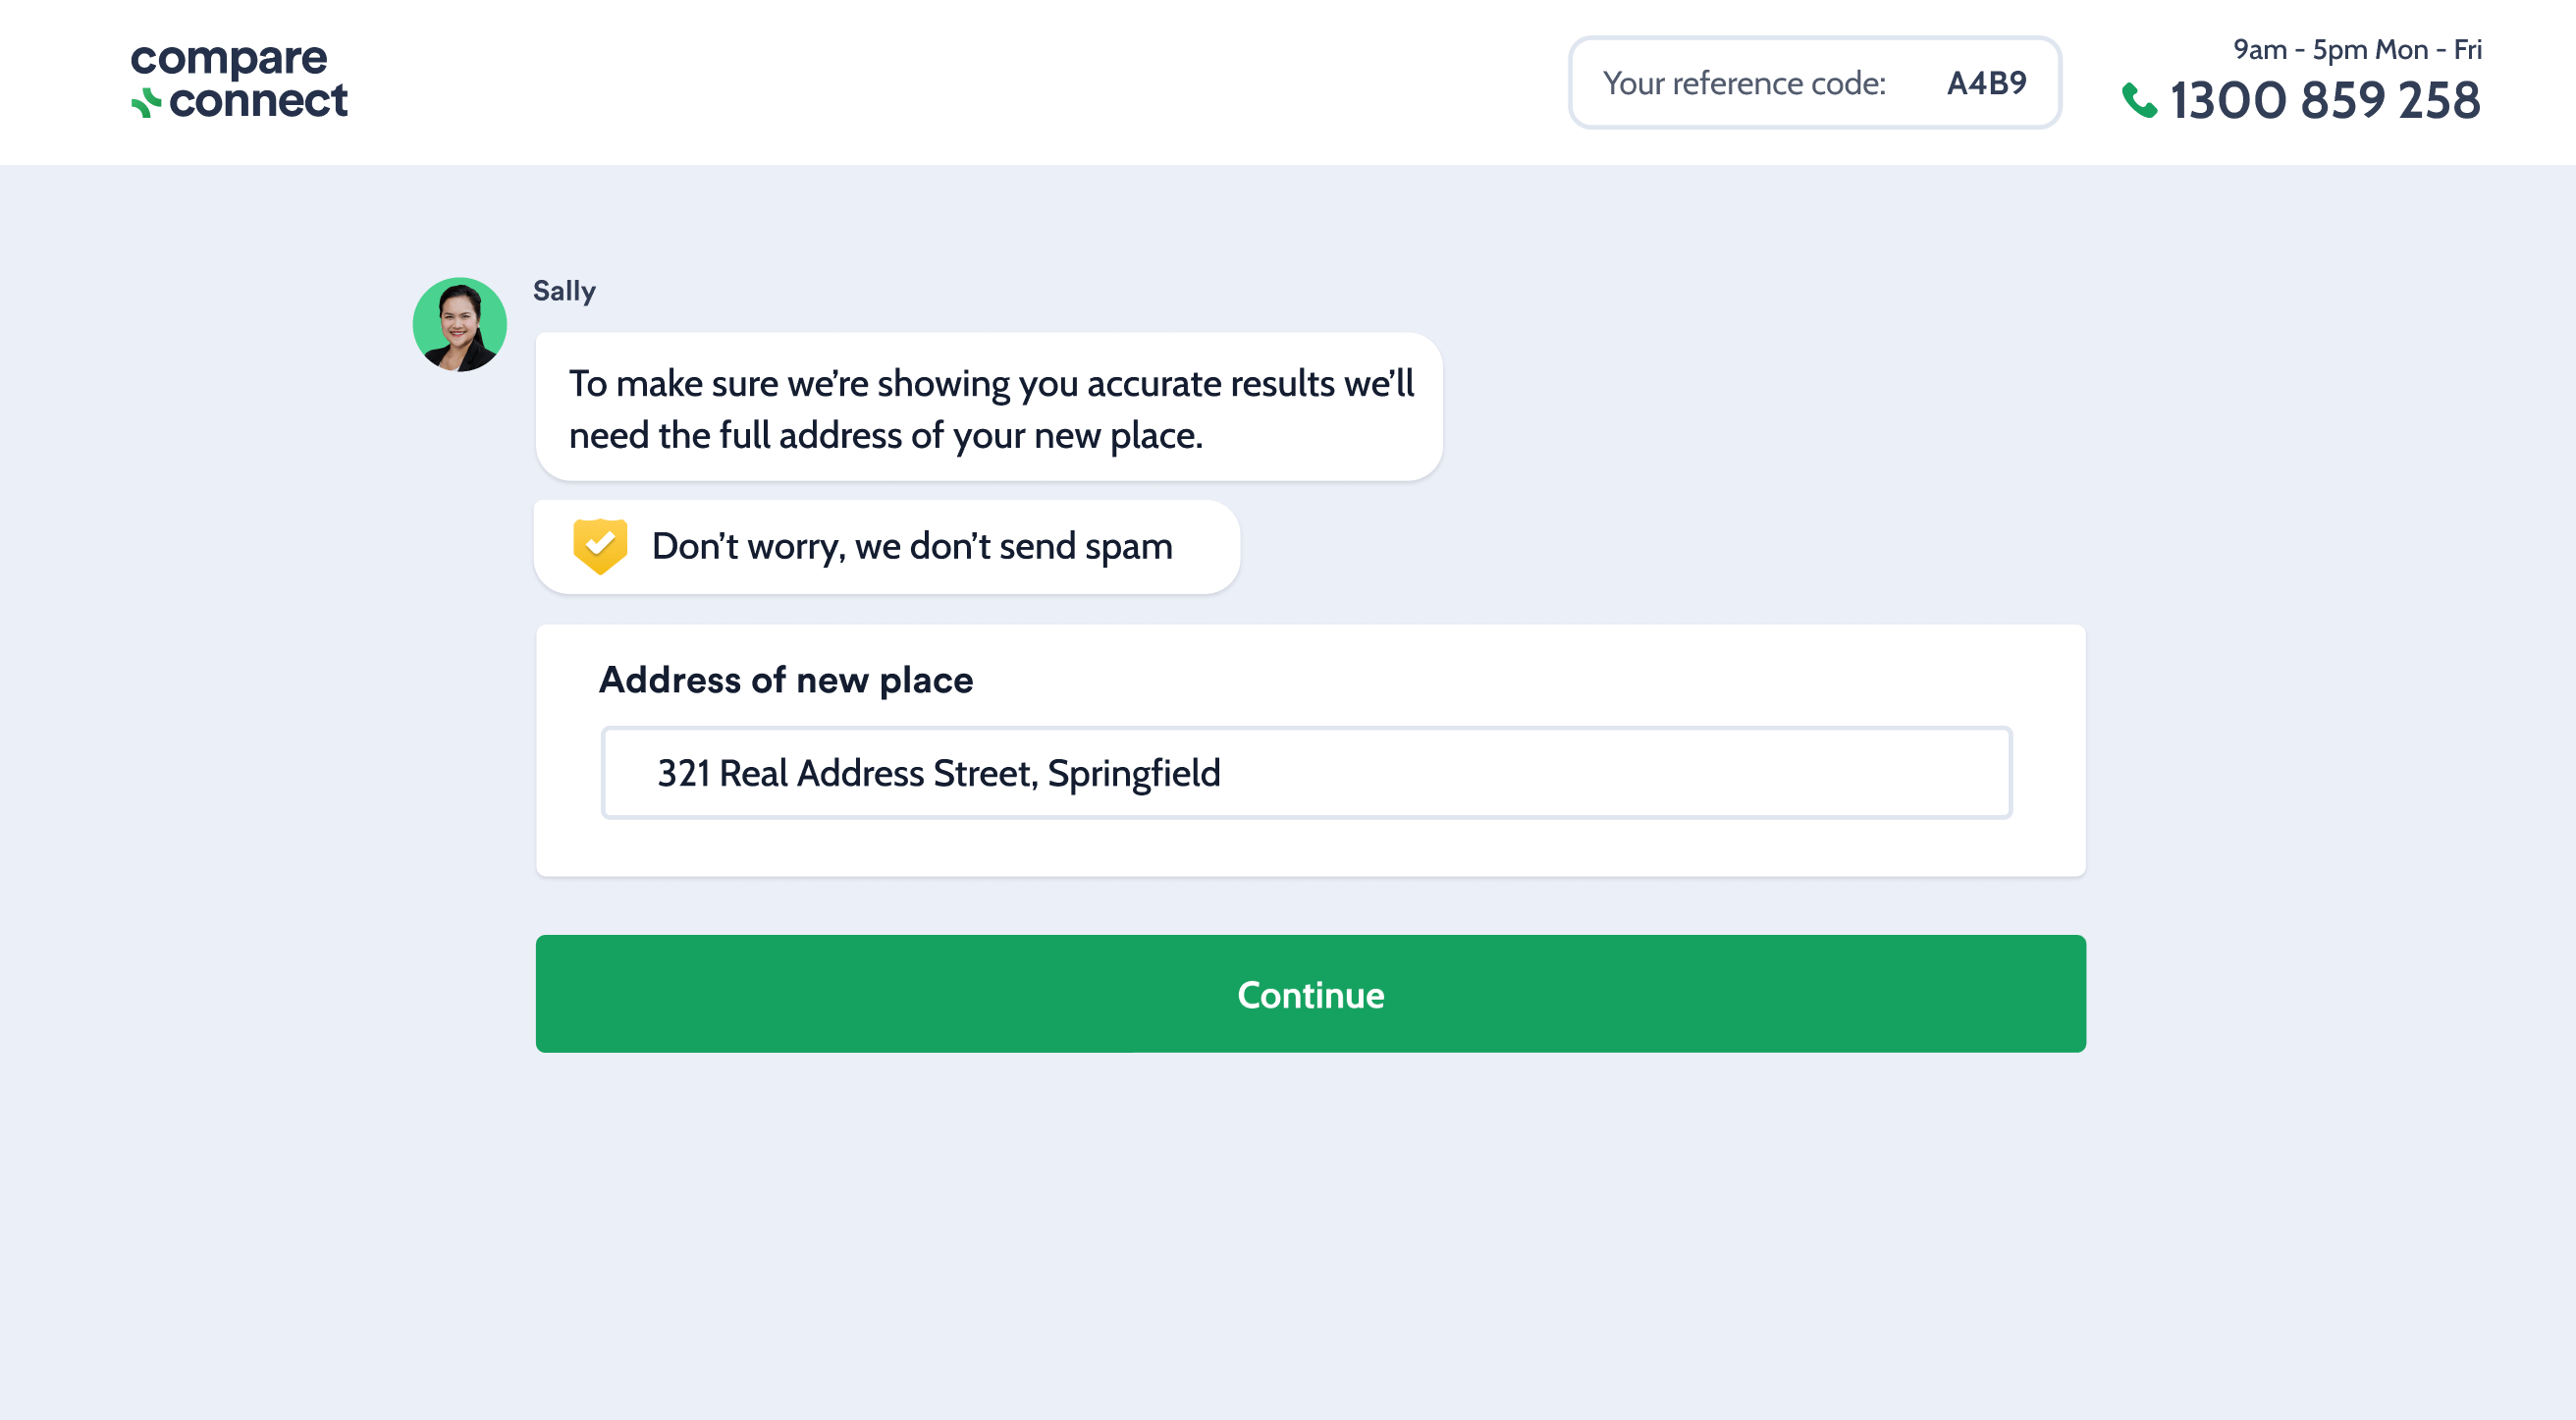 Compare and connect chatbox - Customer loyalty